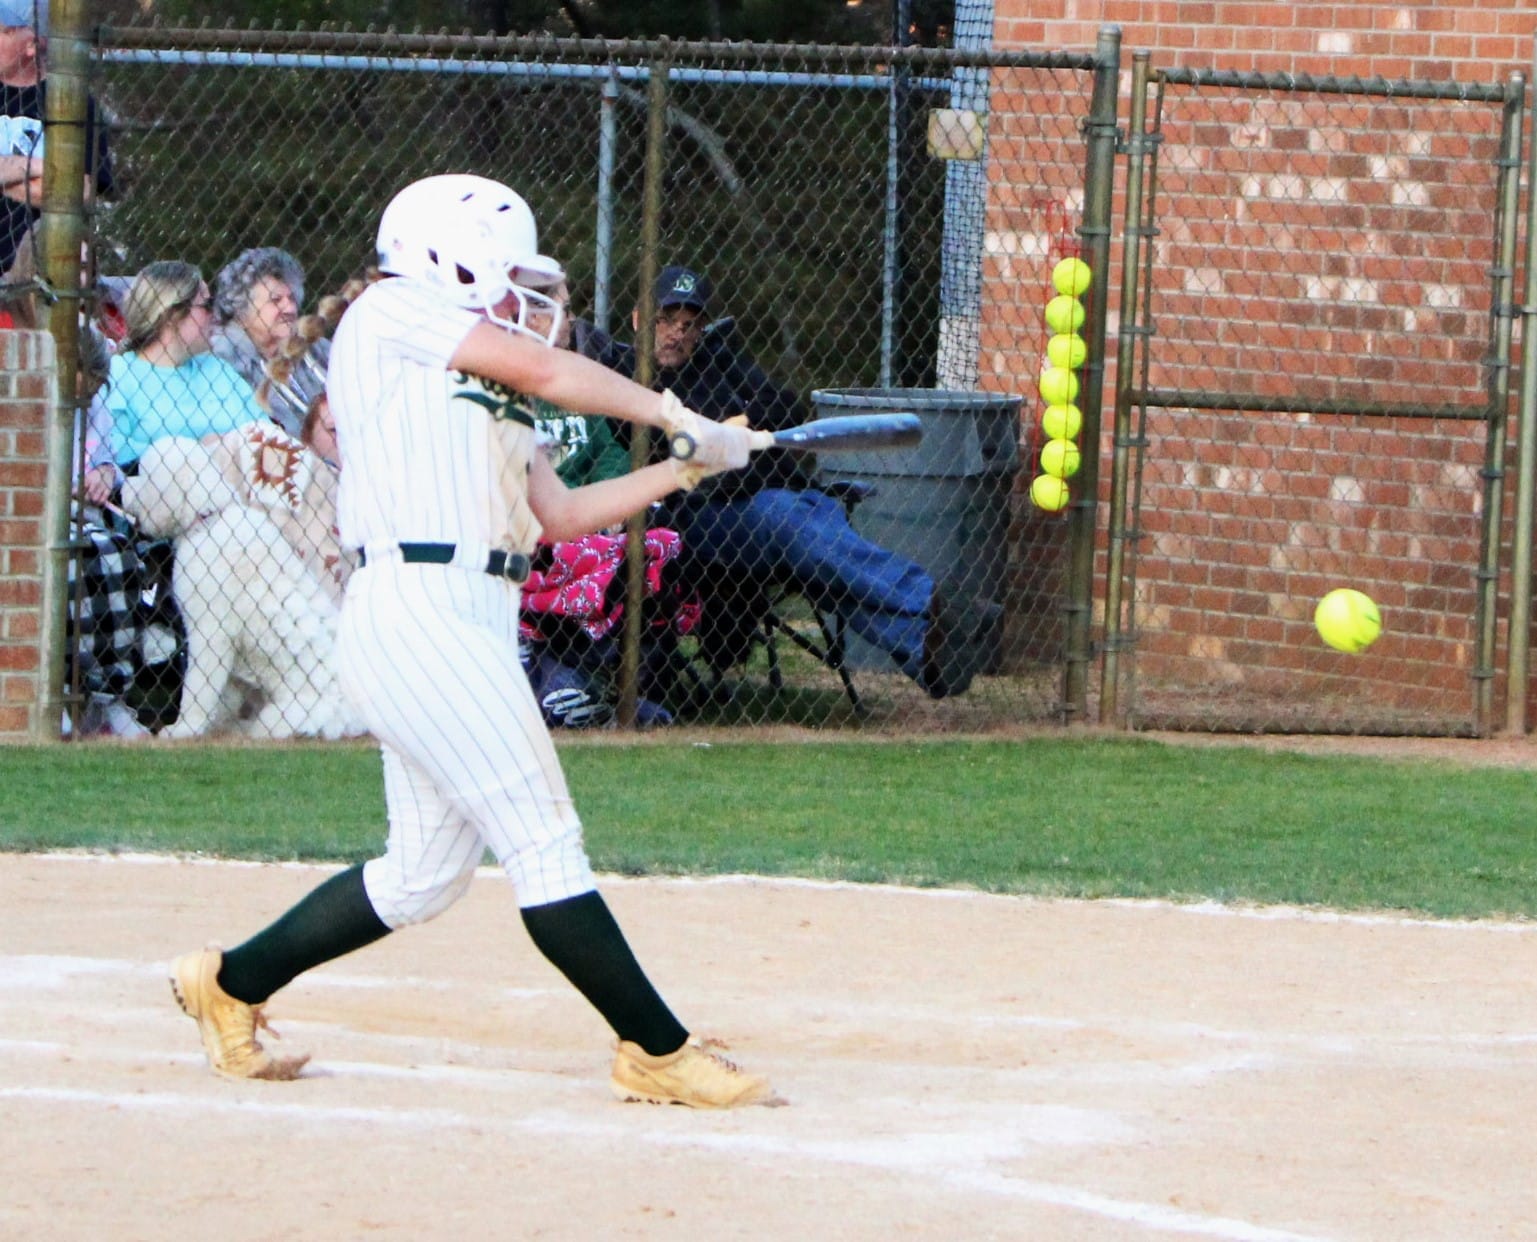 South softball tops Triton with timely hitting